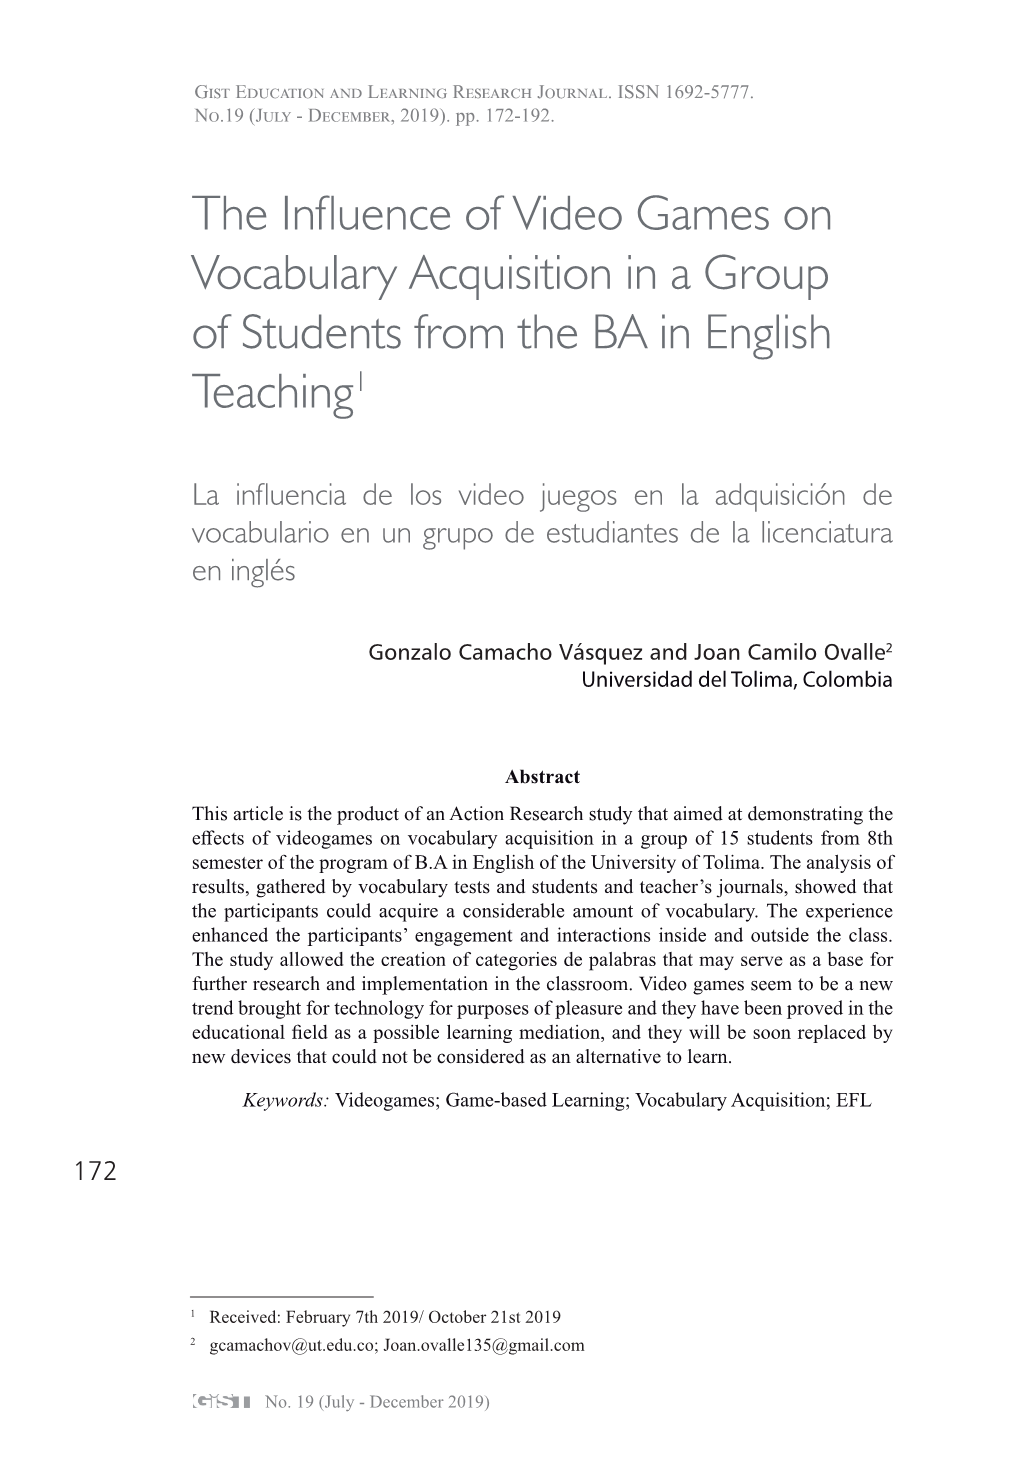 The Influence of Video Games on Vocabulary Acquisition in a Group of Students from the BA in English Teaching1